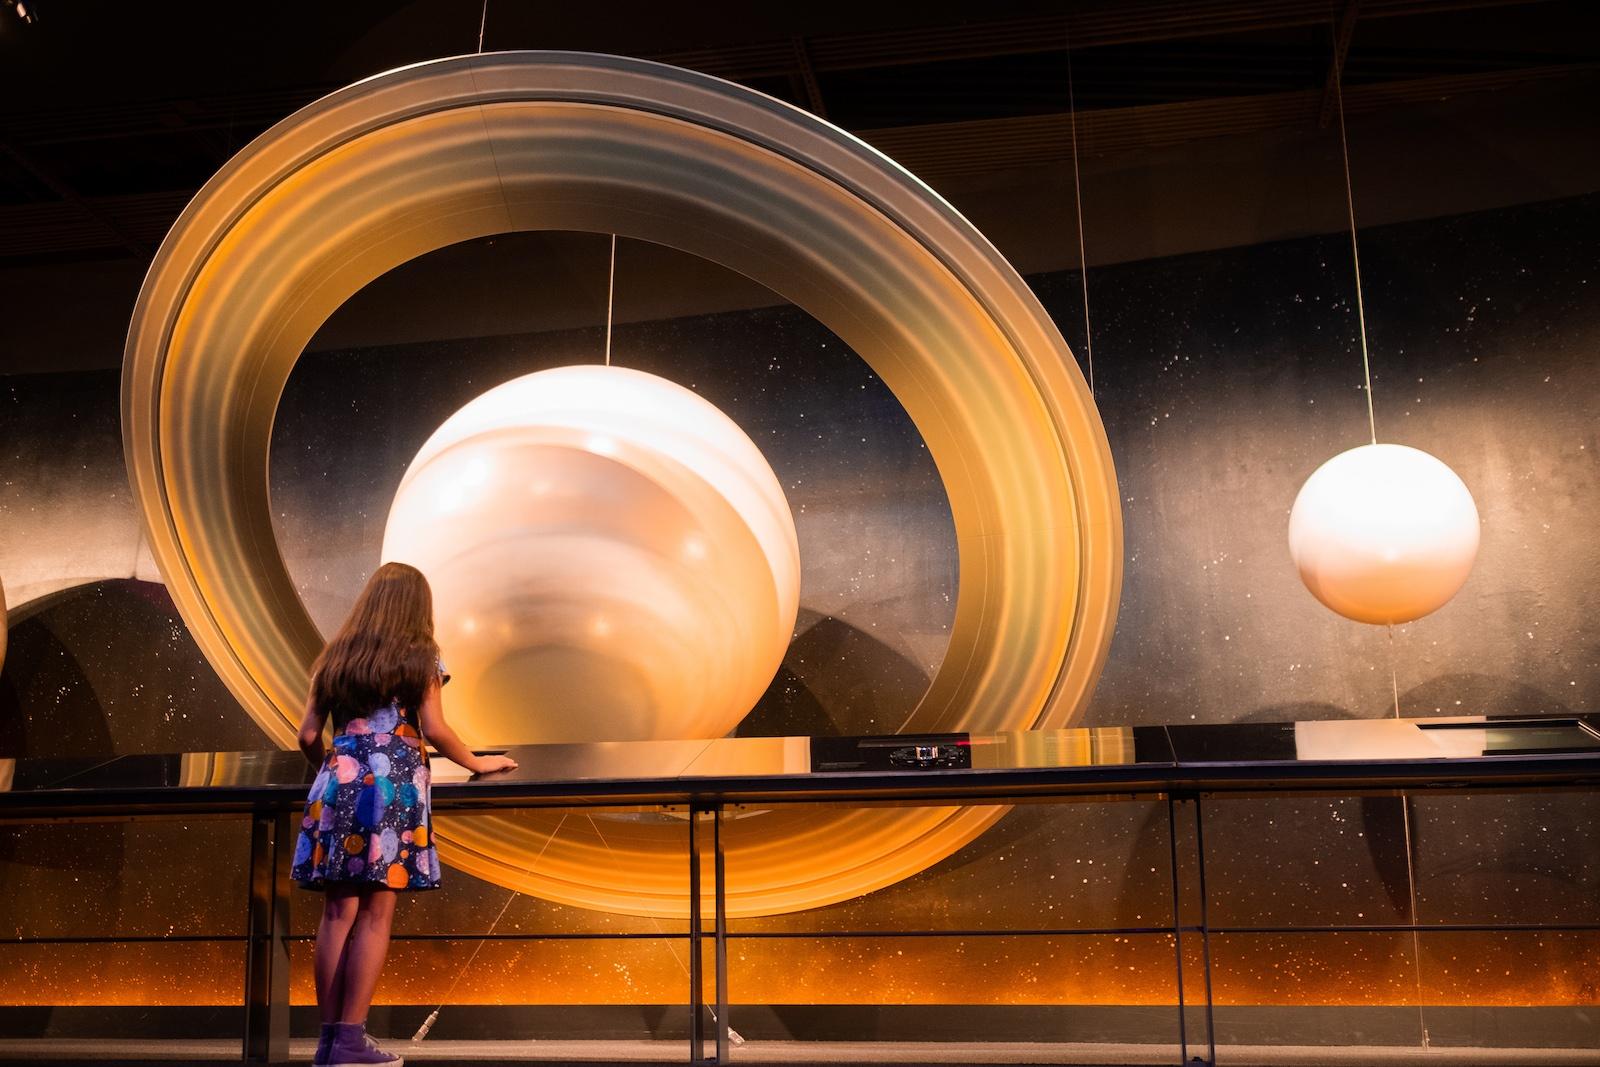 Child stands before large planet display in museum